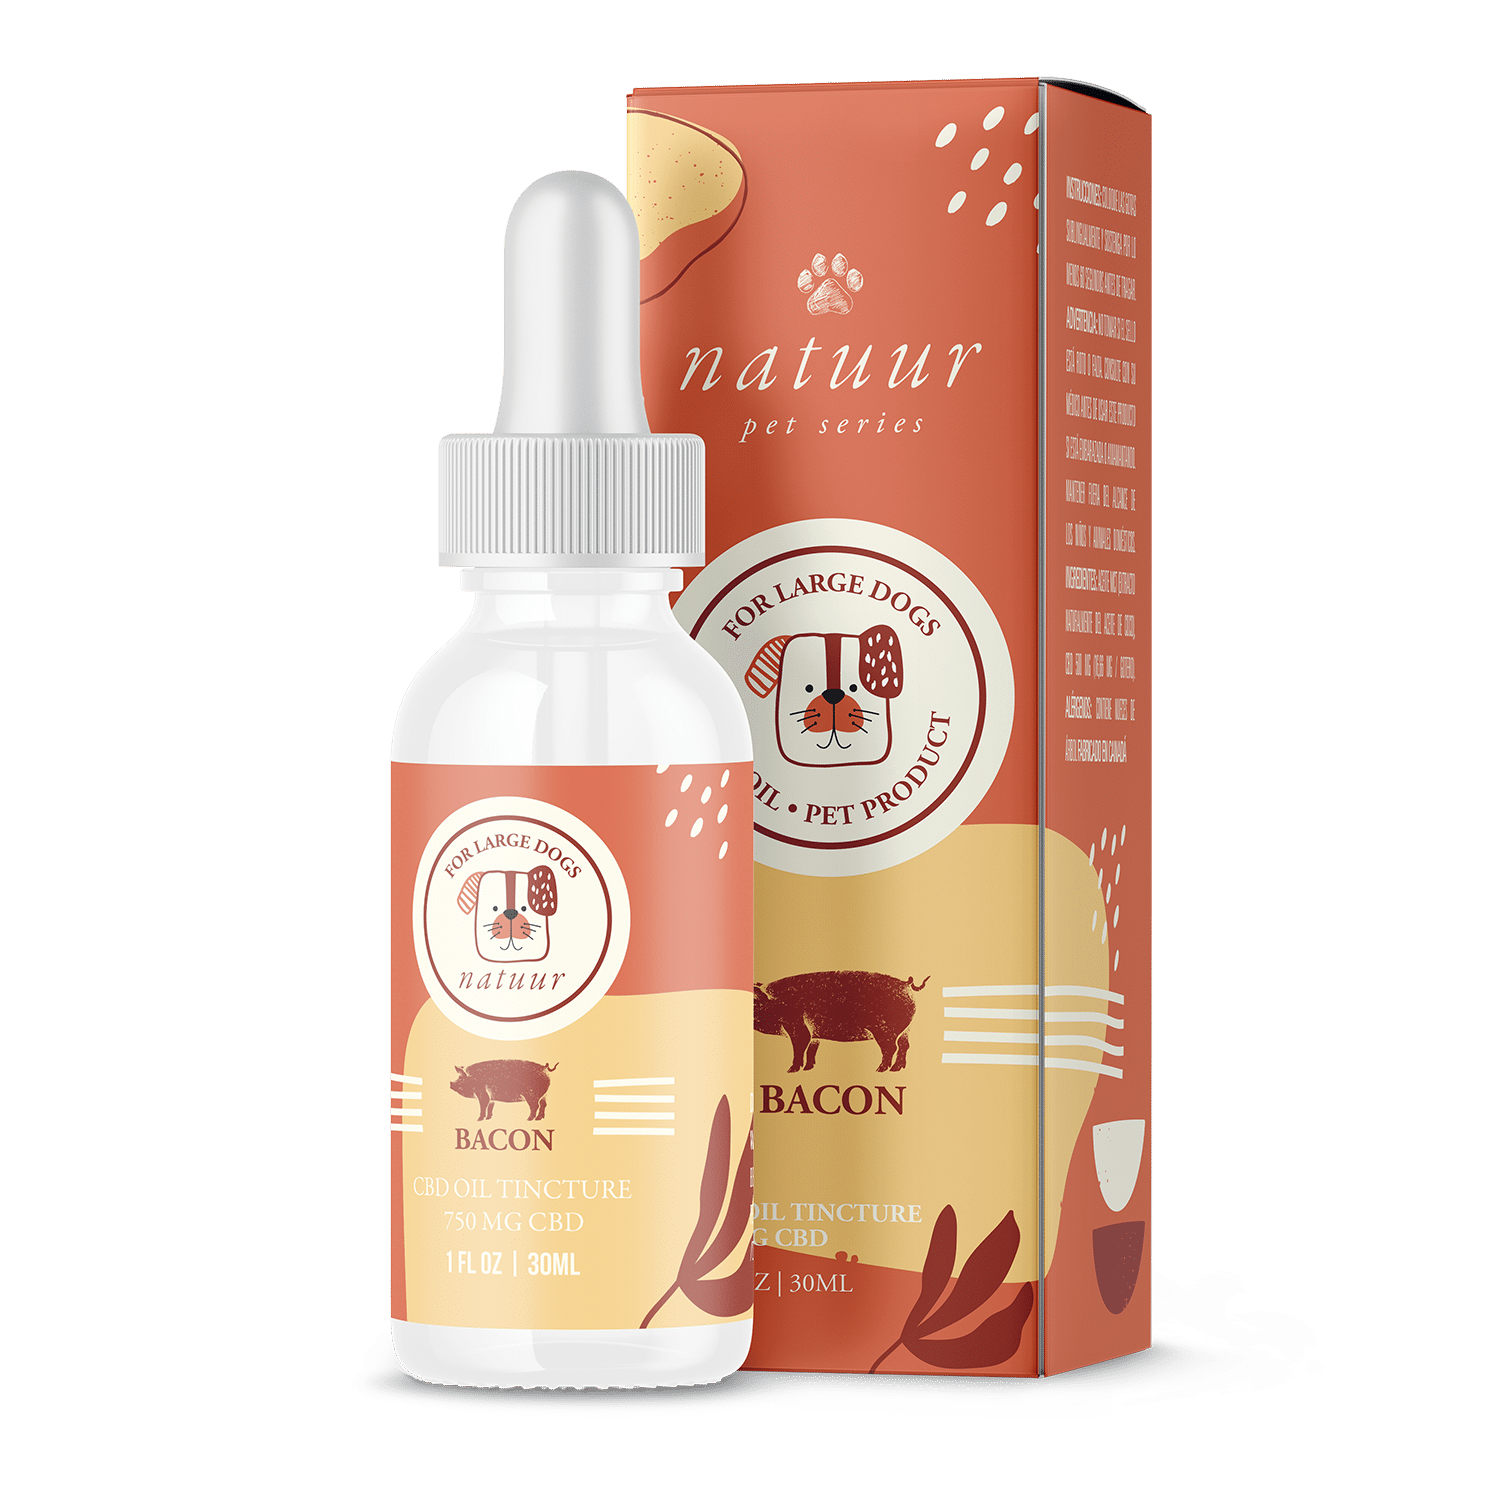 Natuur 750mg CBD for DOGS Bacon or Salmon